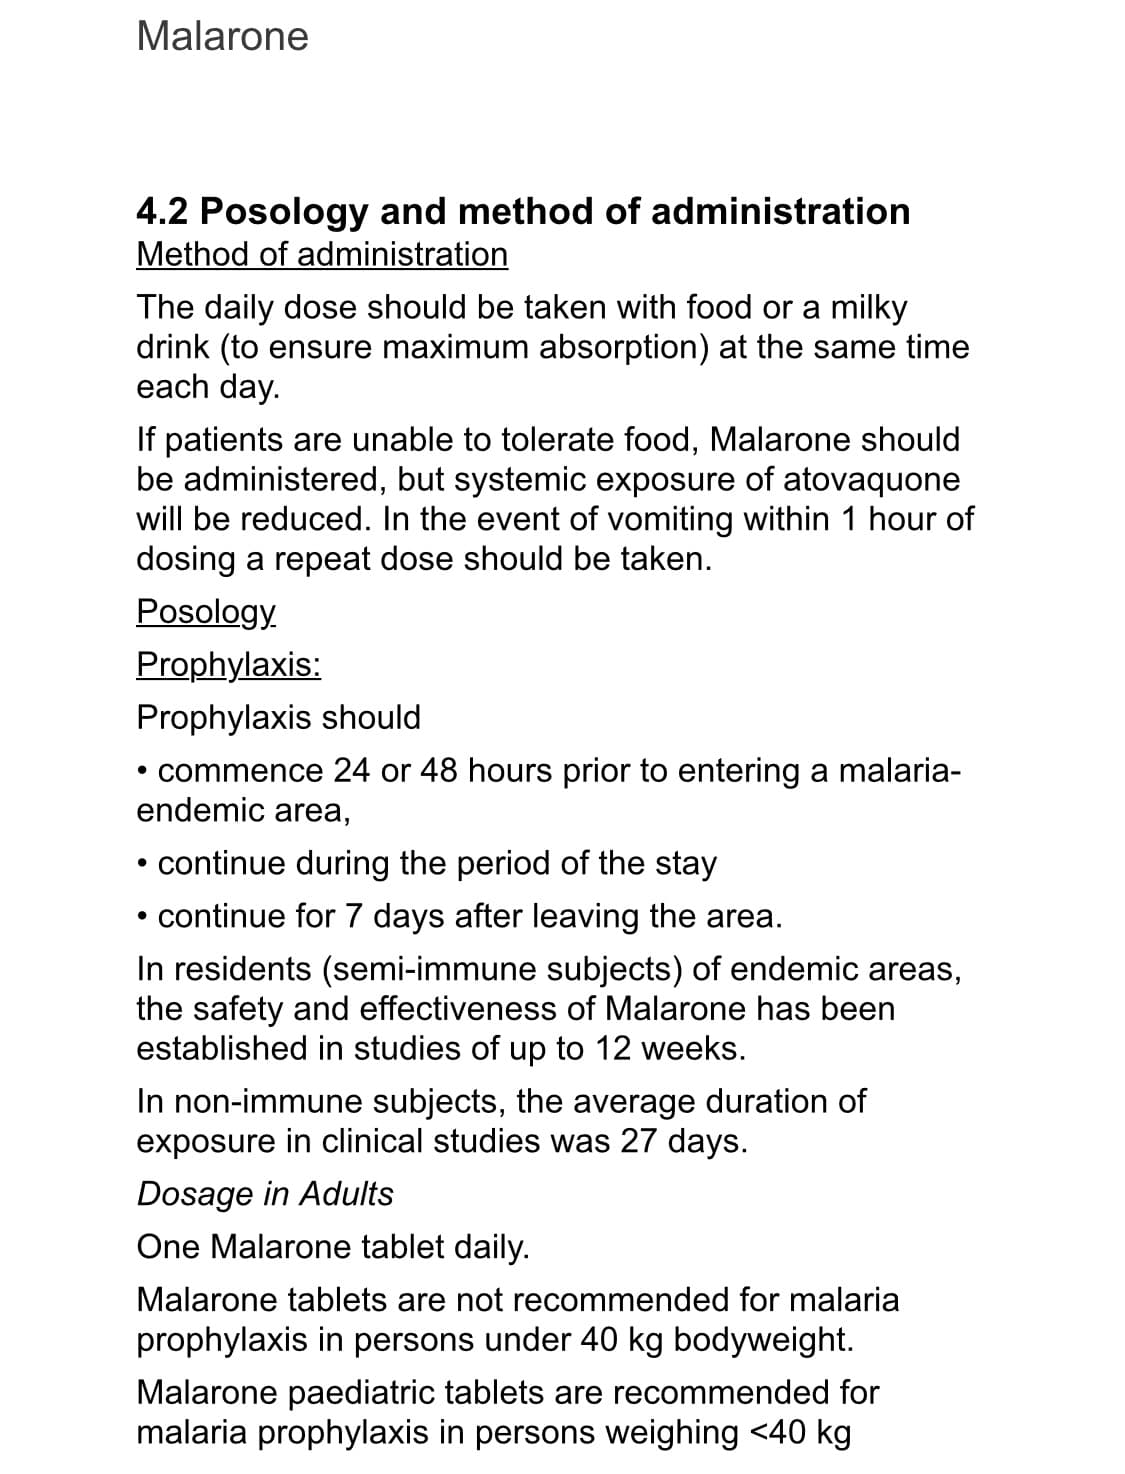 Malarone
4.2 Posology and method of administration
Method of administration
The daily dose should be taken with food or a milky
drink (to ensure maximum absorption) at the same time
each day.
If patients are unable to tolerate food, Malarone should
be administered, but systemic exposure of atovaquone
will be reduced. In the event of vomiting within 1 hour of
dosing a repeat dose should be taken.
Posology.
Prophylaxis:
Prophylaxis should
• commence 24 or 48 hours prior to entering a malaria-
endemic area,
• continue during the period of the stay
• continue for 7 days after leaving the area.
In residents (semi-immune subjects) of endemic areas,
the safety and effectiveness of Malarone has been
established in studies of up to 12 weeks.
In non-immune subjects, the average duration of
exposure in clinical studies was 27 days.
Dosage in Adults
One Malarone tablet daily.
Malarone tablets are not recommended for malaria
prophylaxis in persons under 40 kg bodyweight.
Malarone paediatric tablets are recommended for
malaria prophylaxis in persons weighing <40 kg
